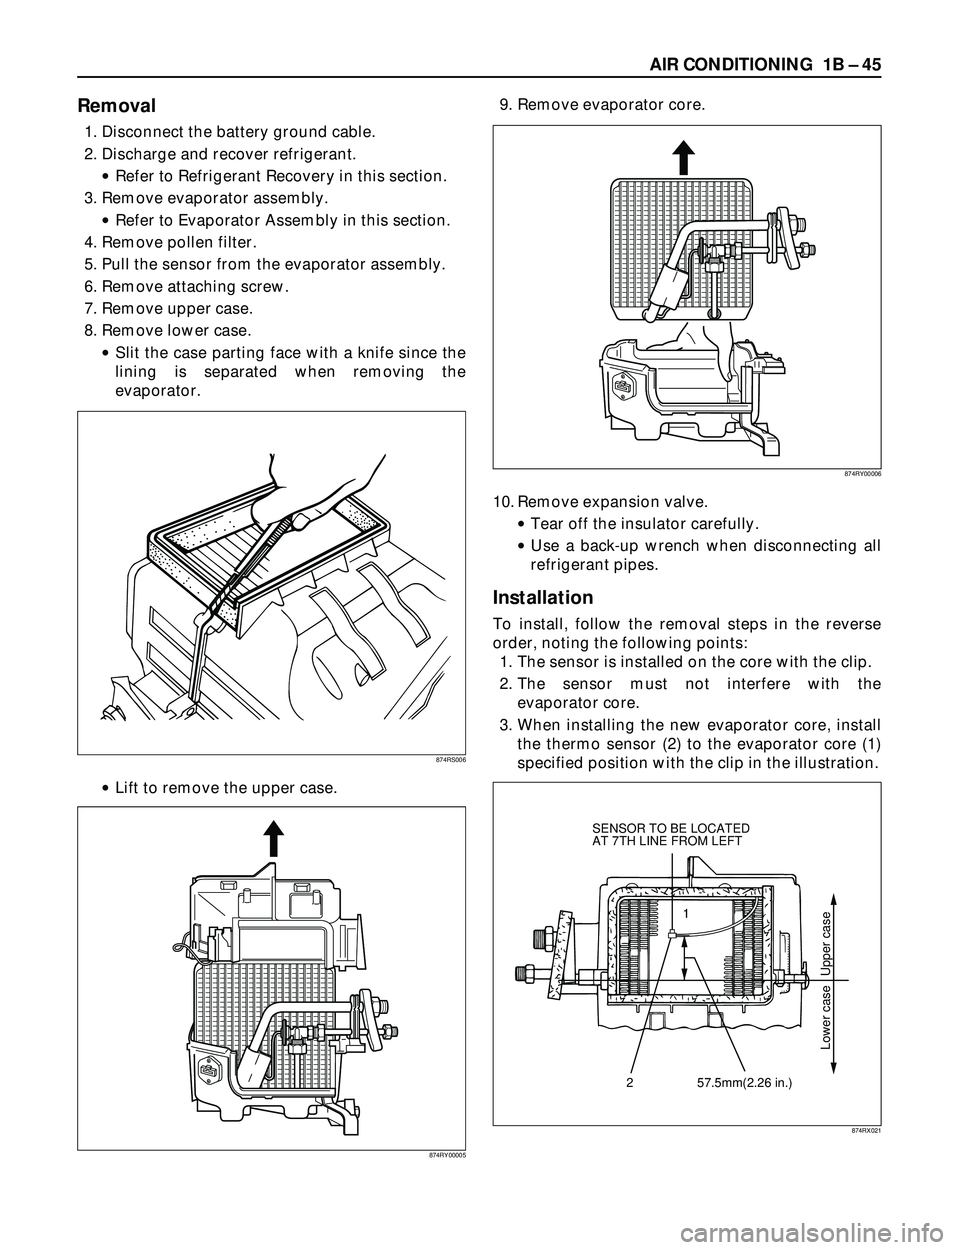 ISUZU TROOPER 1998  Service Repair Manual AIR CONDITIONING  1B Ð 45
Removal
1. Disconnect the battery ground cable.
2. Discharge and recover refrigerant.
·Refer to Refrigerant Recovery in this section.
3. Remove evaporator assembly.
·Refer